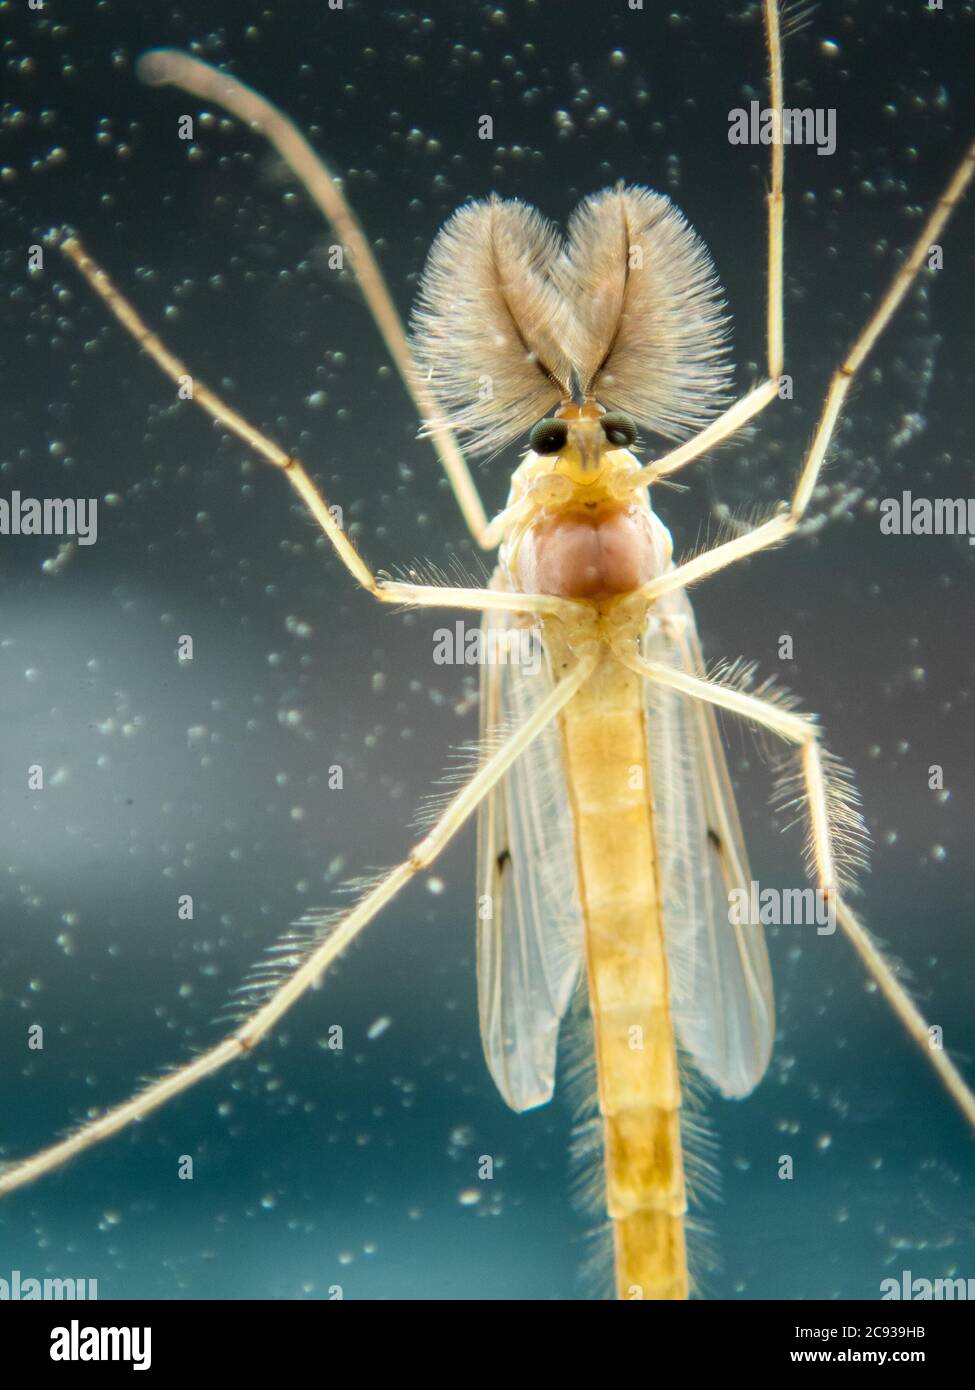 macro photo of colorful flying insect resting on a window Stock Photo